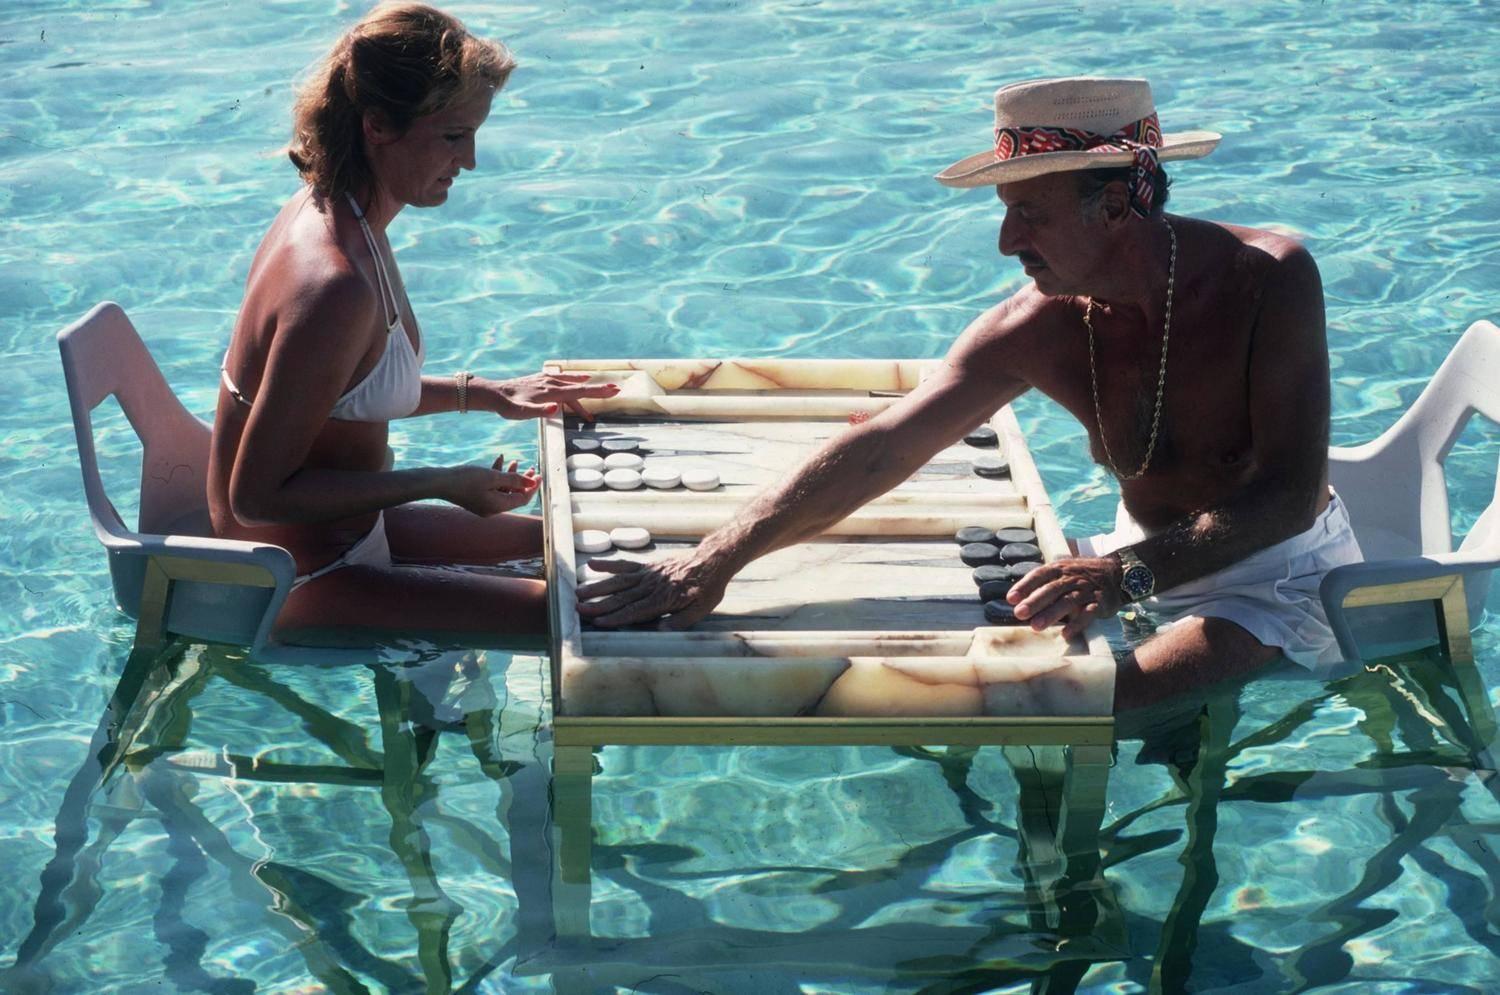 Slim Aarons Figurative Photograph - Keep Your Cool (Backgammon in Acapulco) free shipping